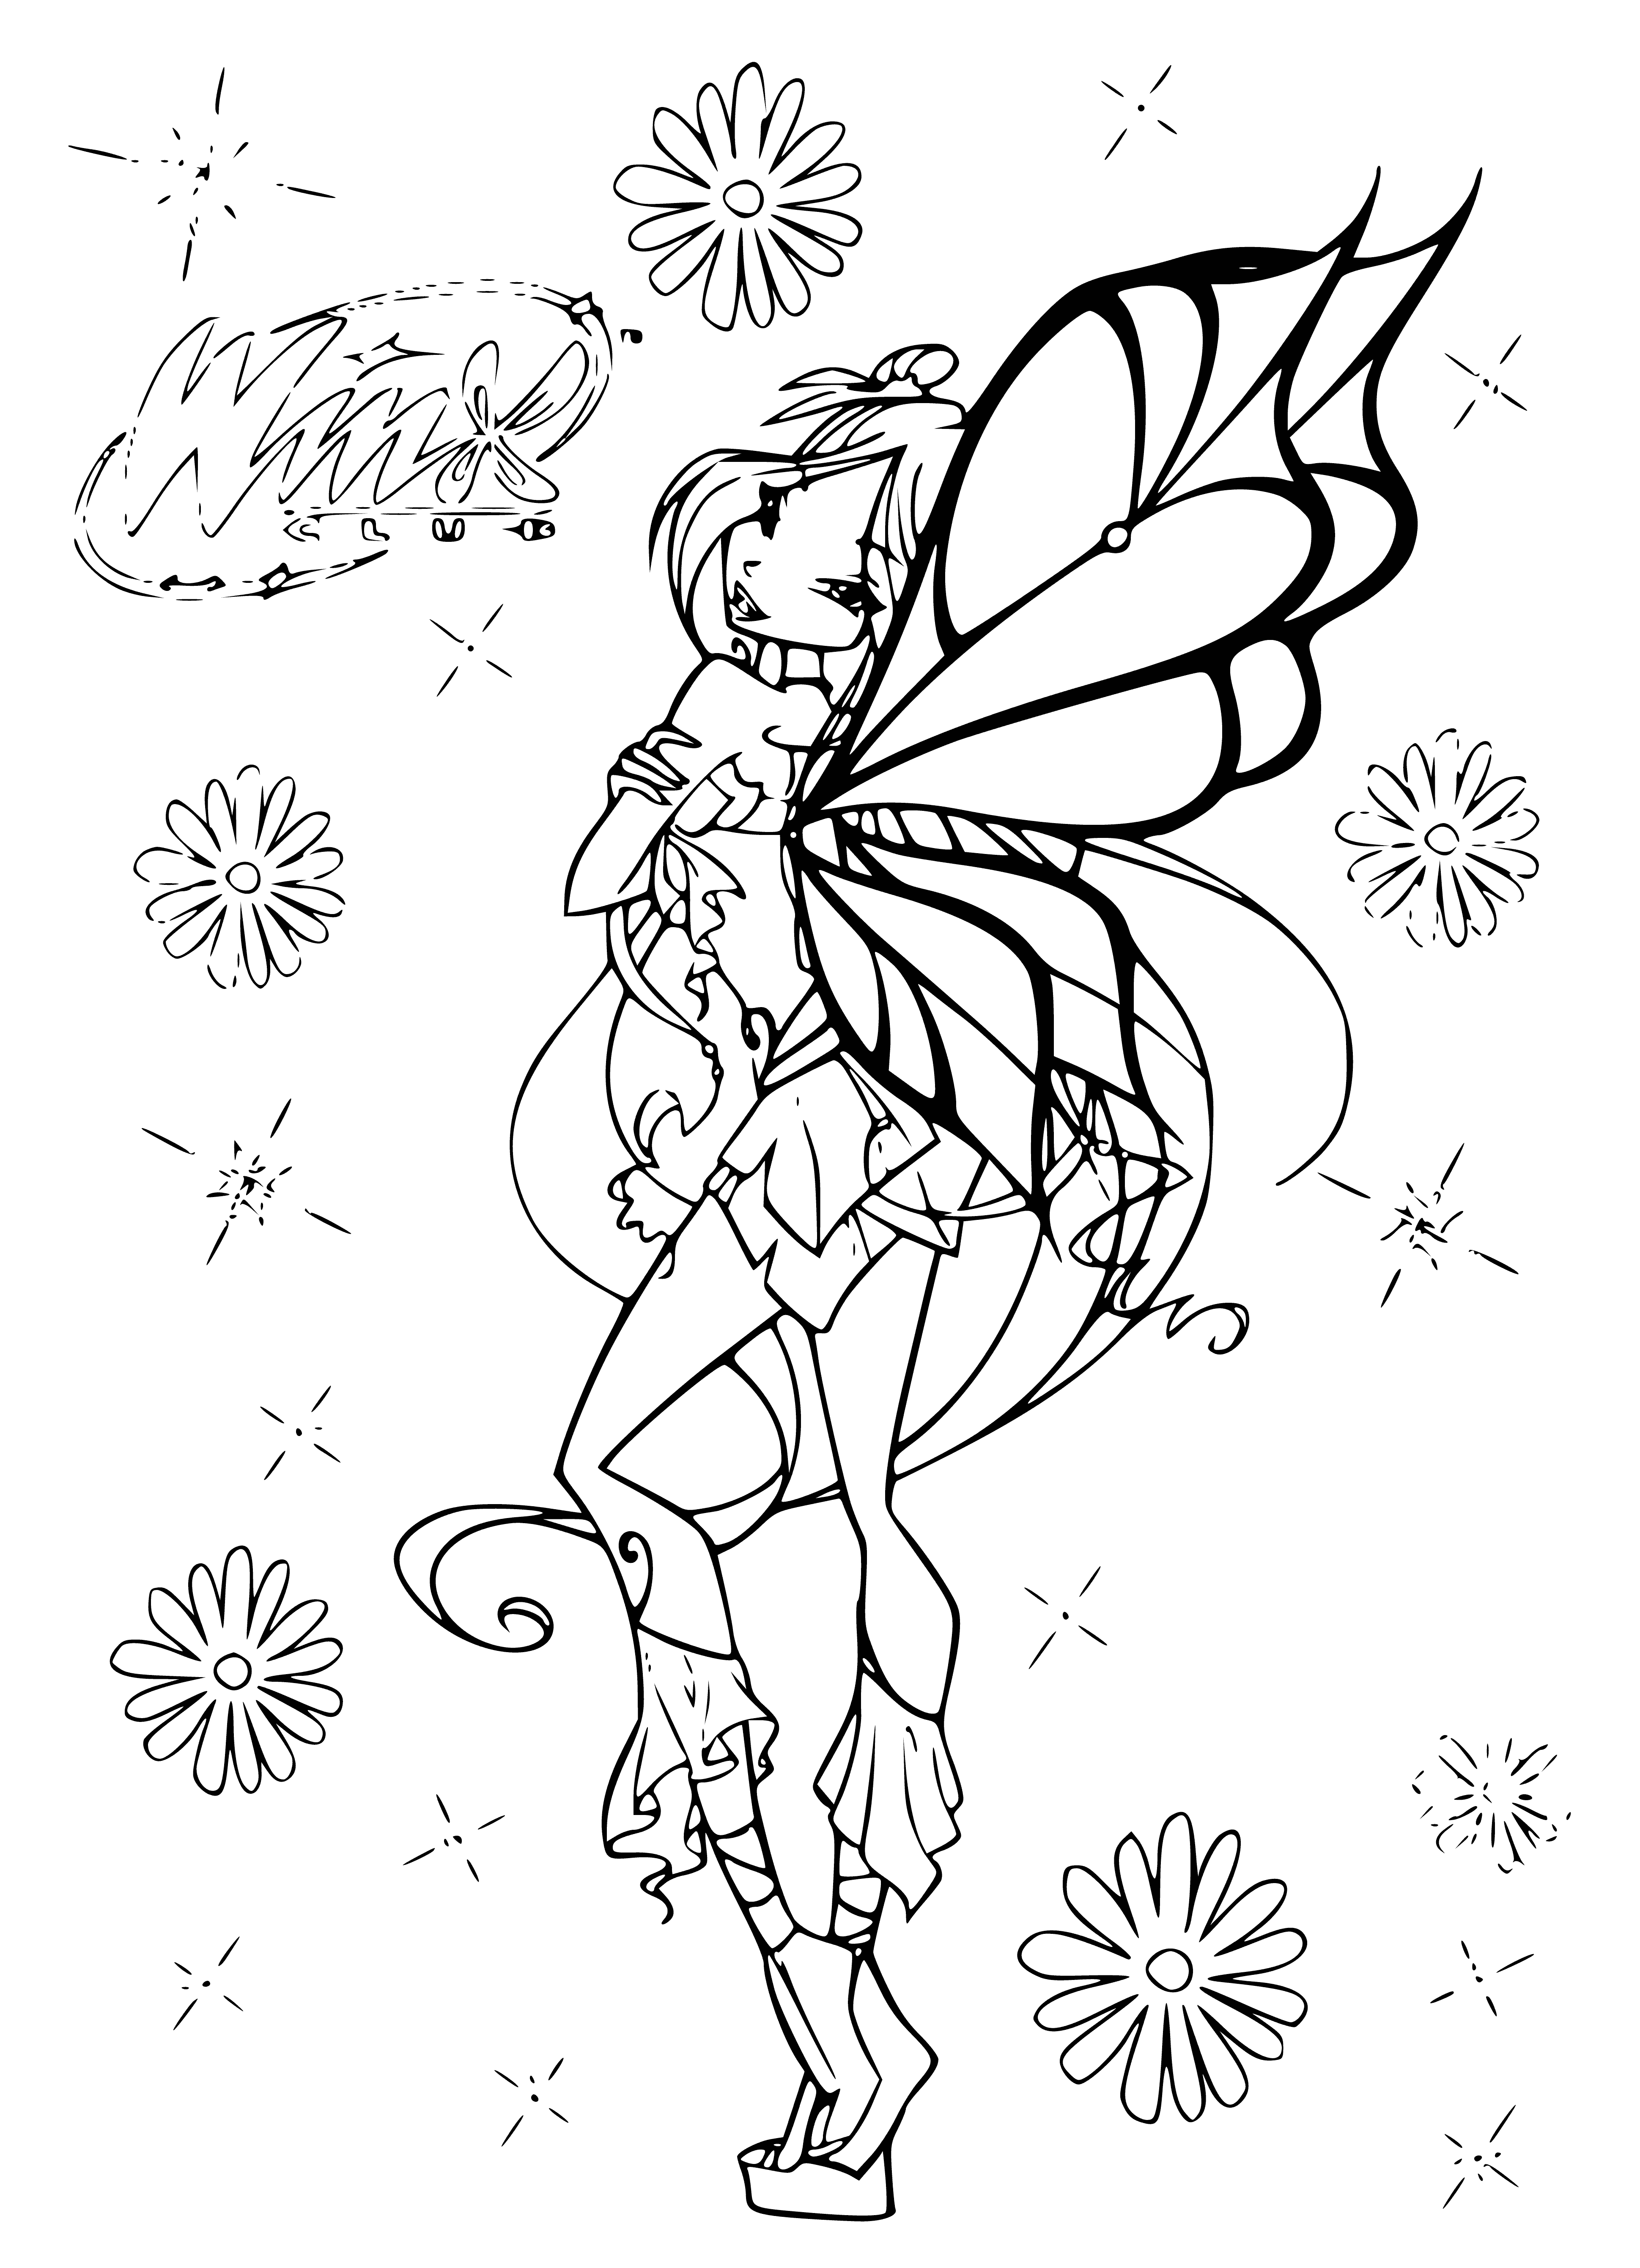 coloring page: A fairy with light brown skin, white hair, delicate features & yellow butterfly perching on her shoulder collects a pink flower in a green dress surrounded by blooming white & pink flowers with soft, glowing light.